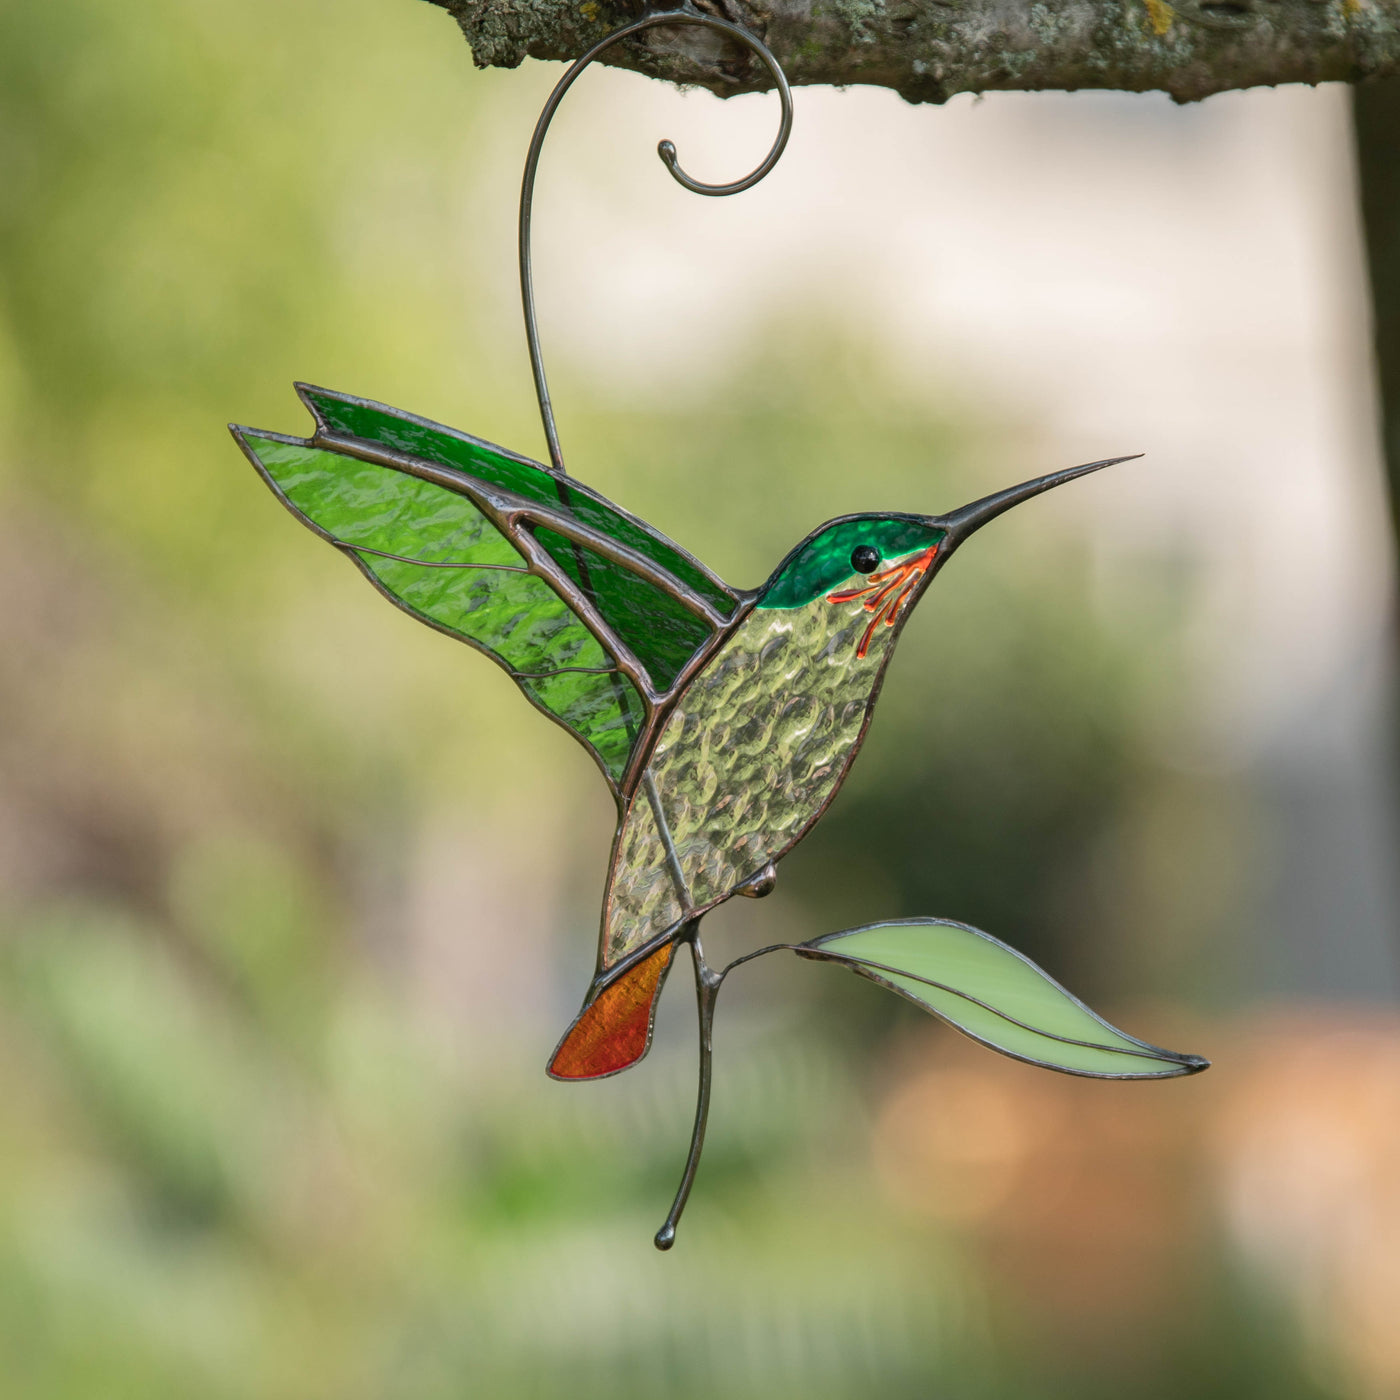 Stained glass flying green hummingbird window hanging 